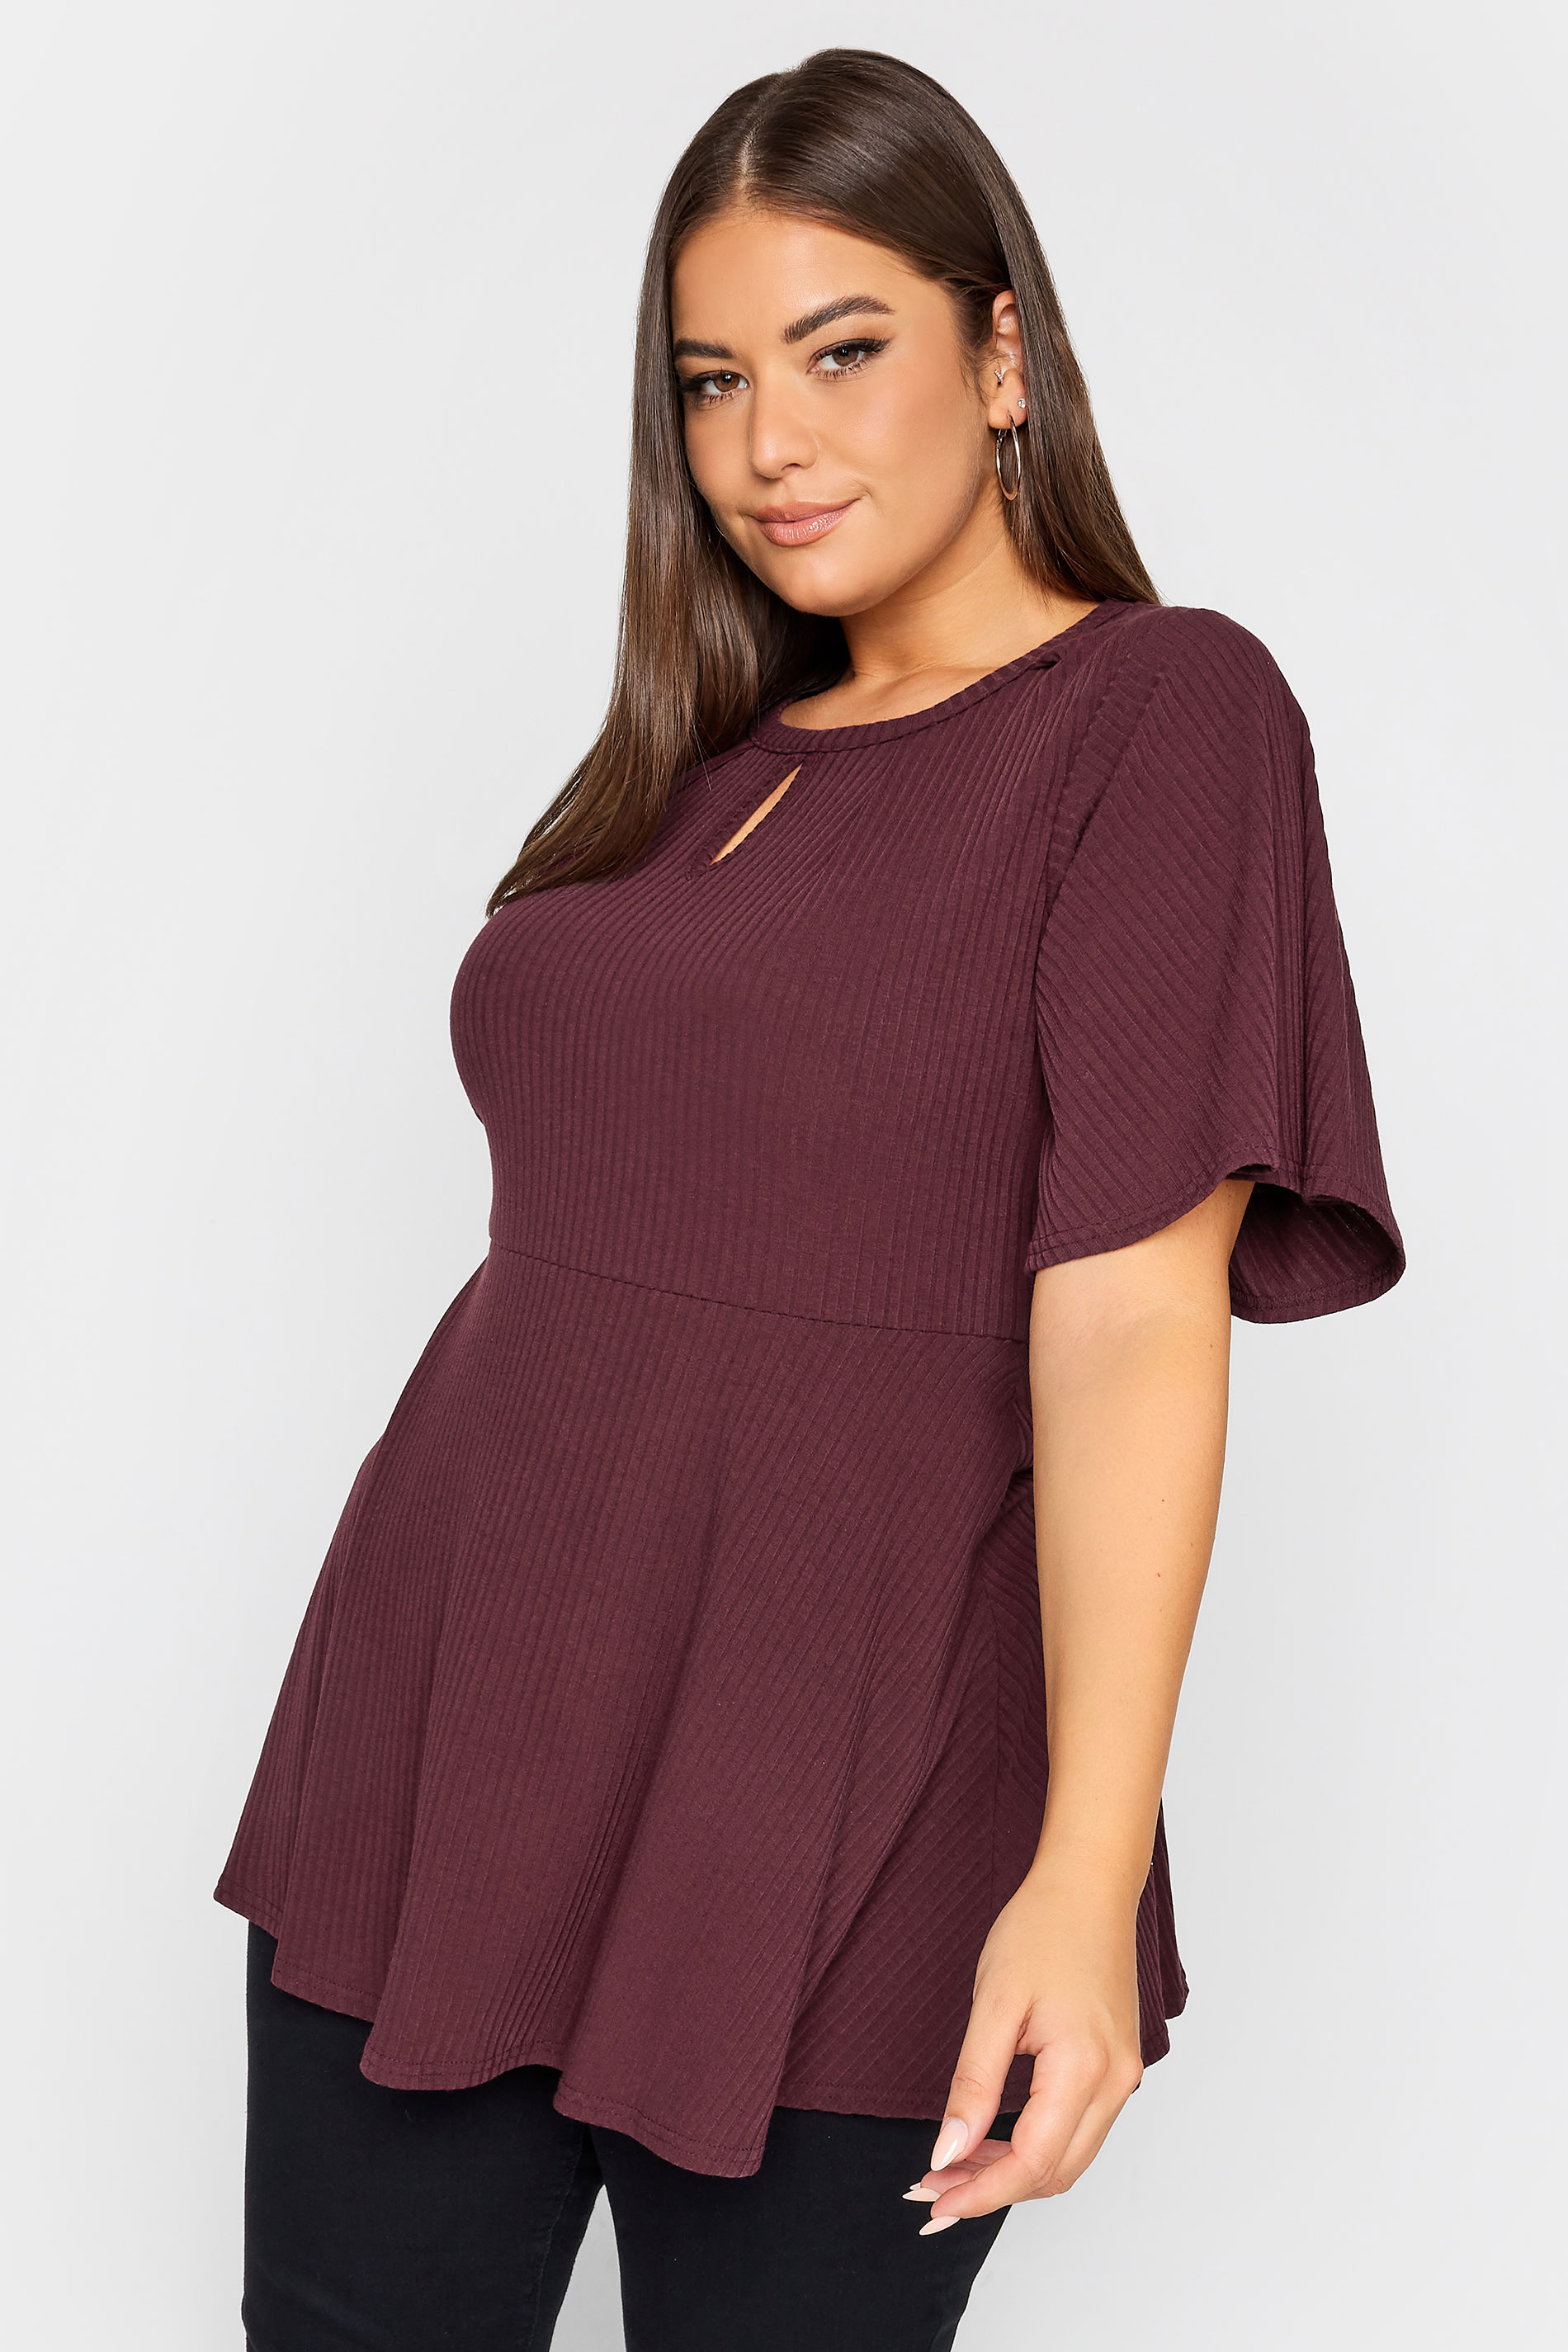 YOURS Plus Size Burgundy Red Keyhole Peplum Top | Yours Clothing 1